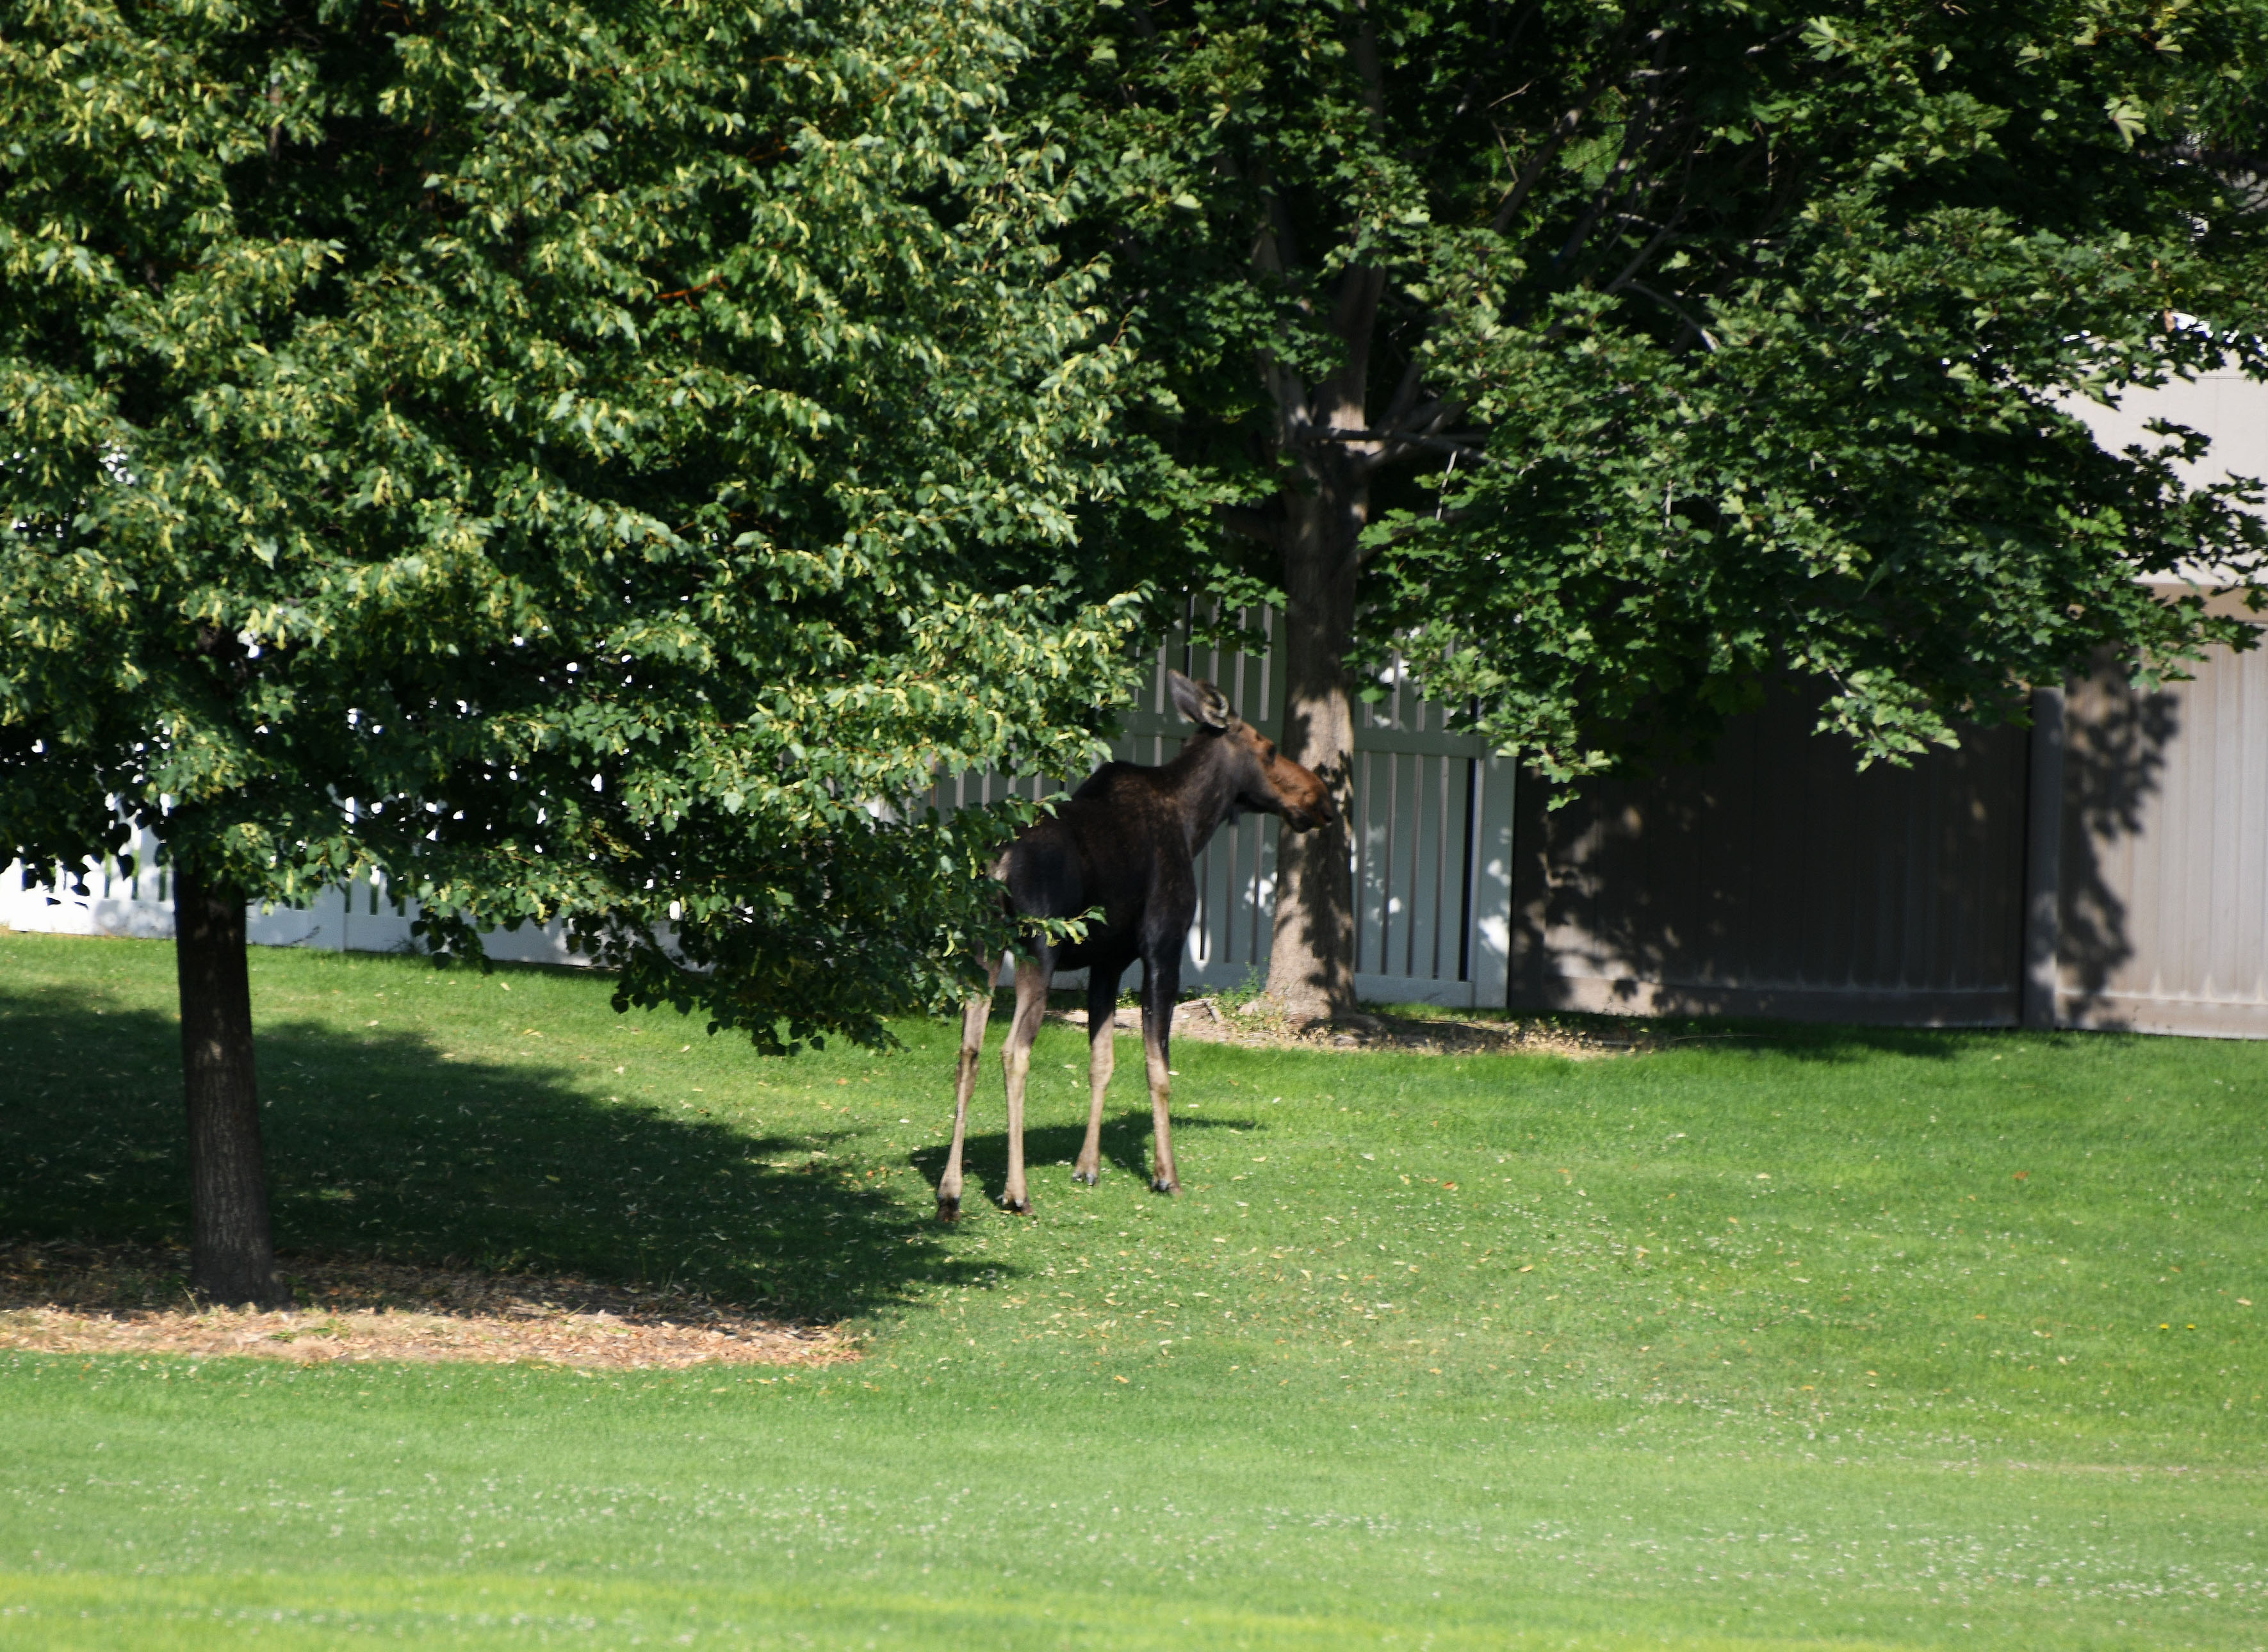 A yearling moose in a Twin Falls city park in 2021.